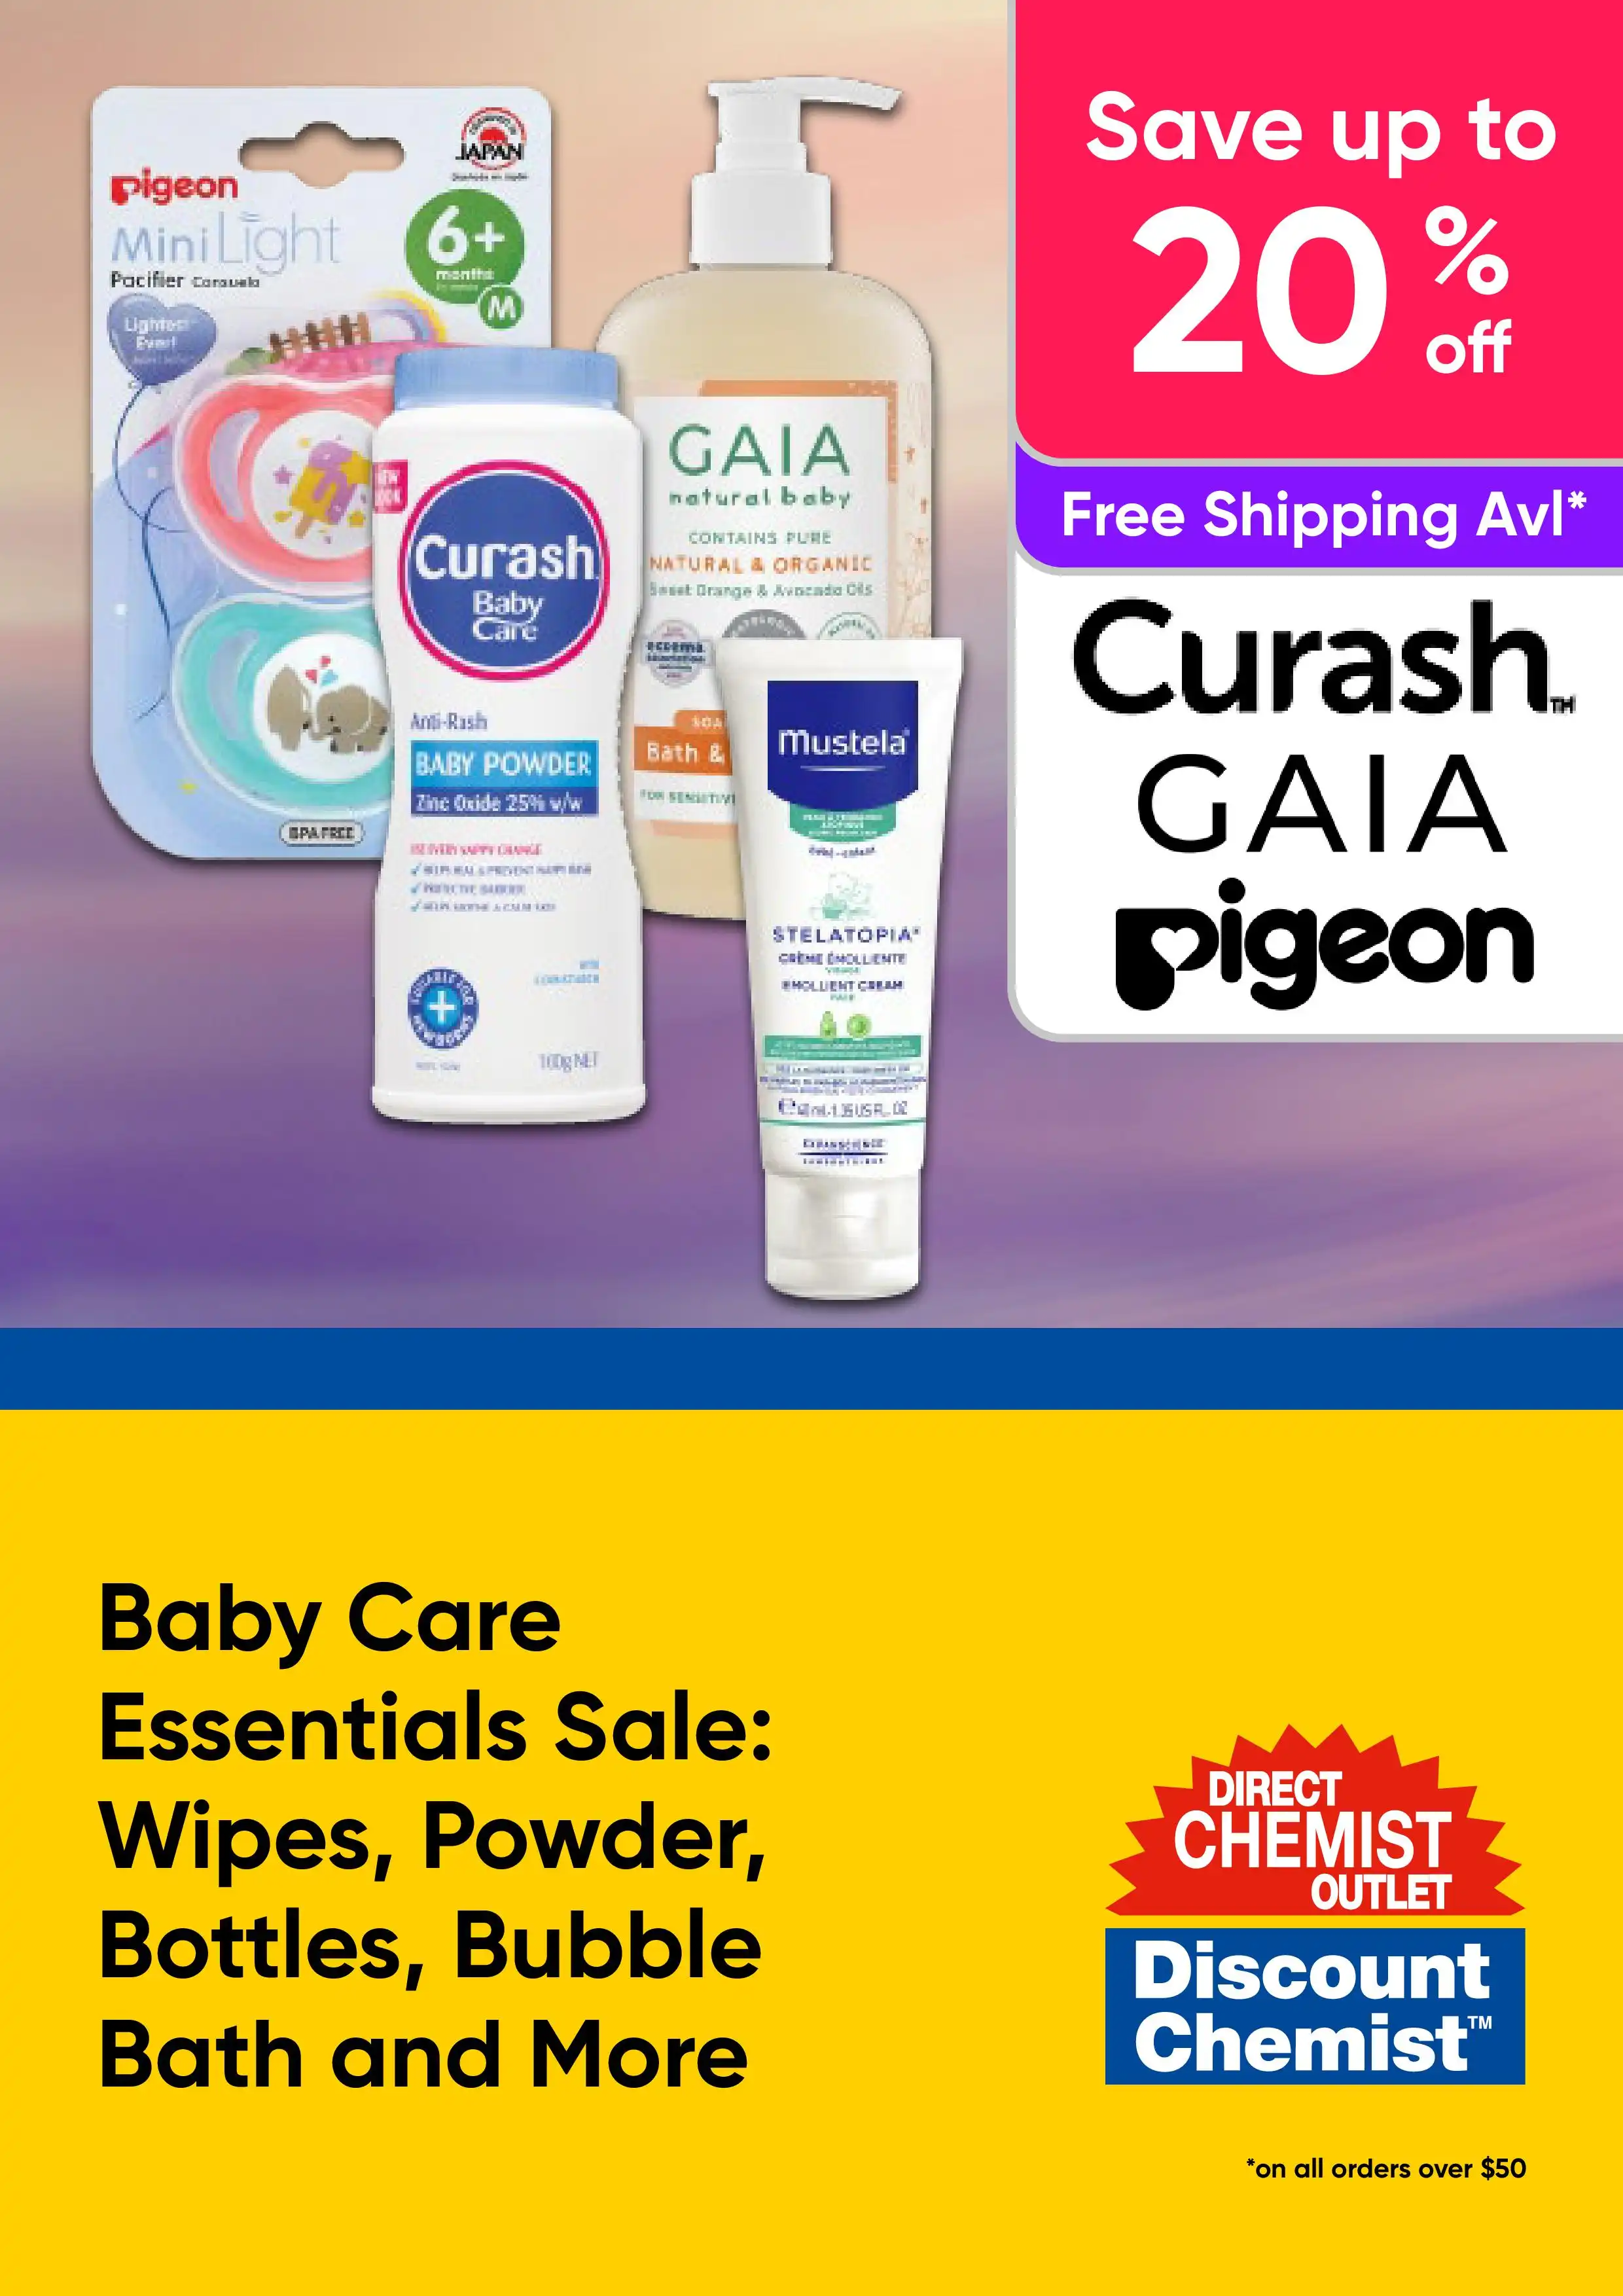 Baby Care Essentials Sale - Wipes, Powder, Bottles, Bubble Bath and More - Curash, Gaia, Pigeon - up to 20% off